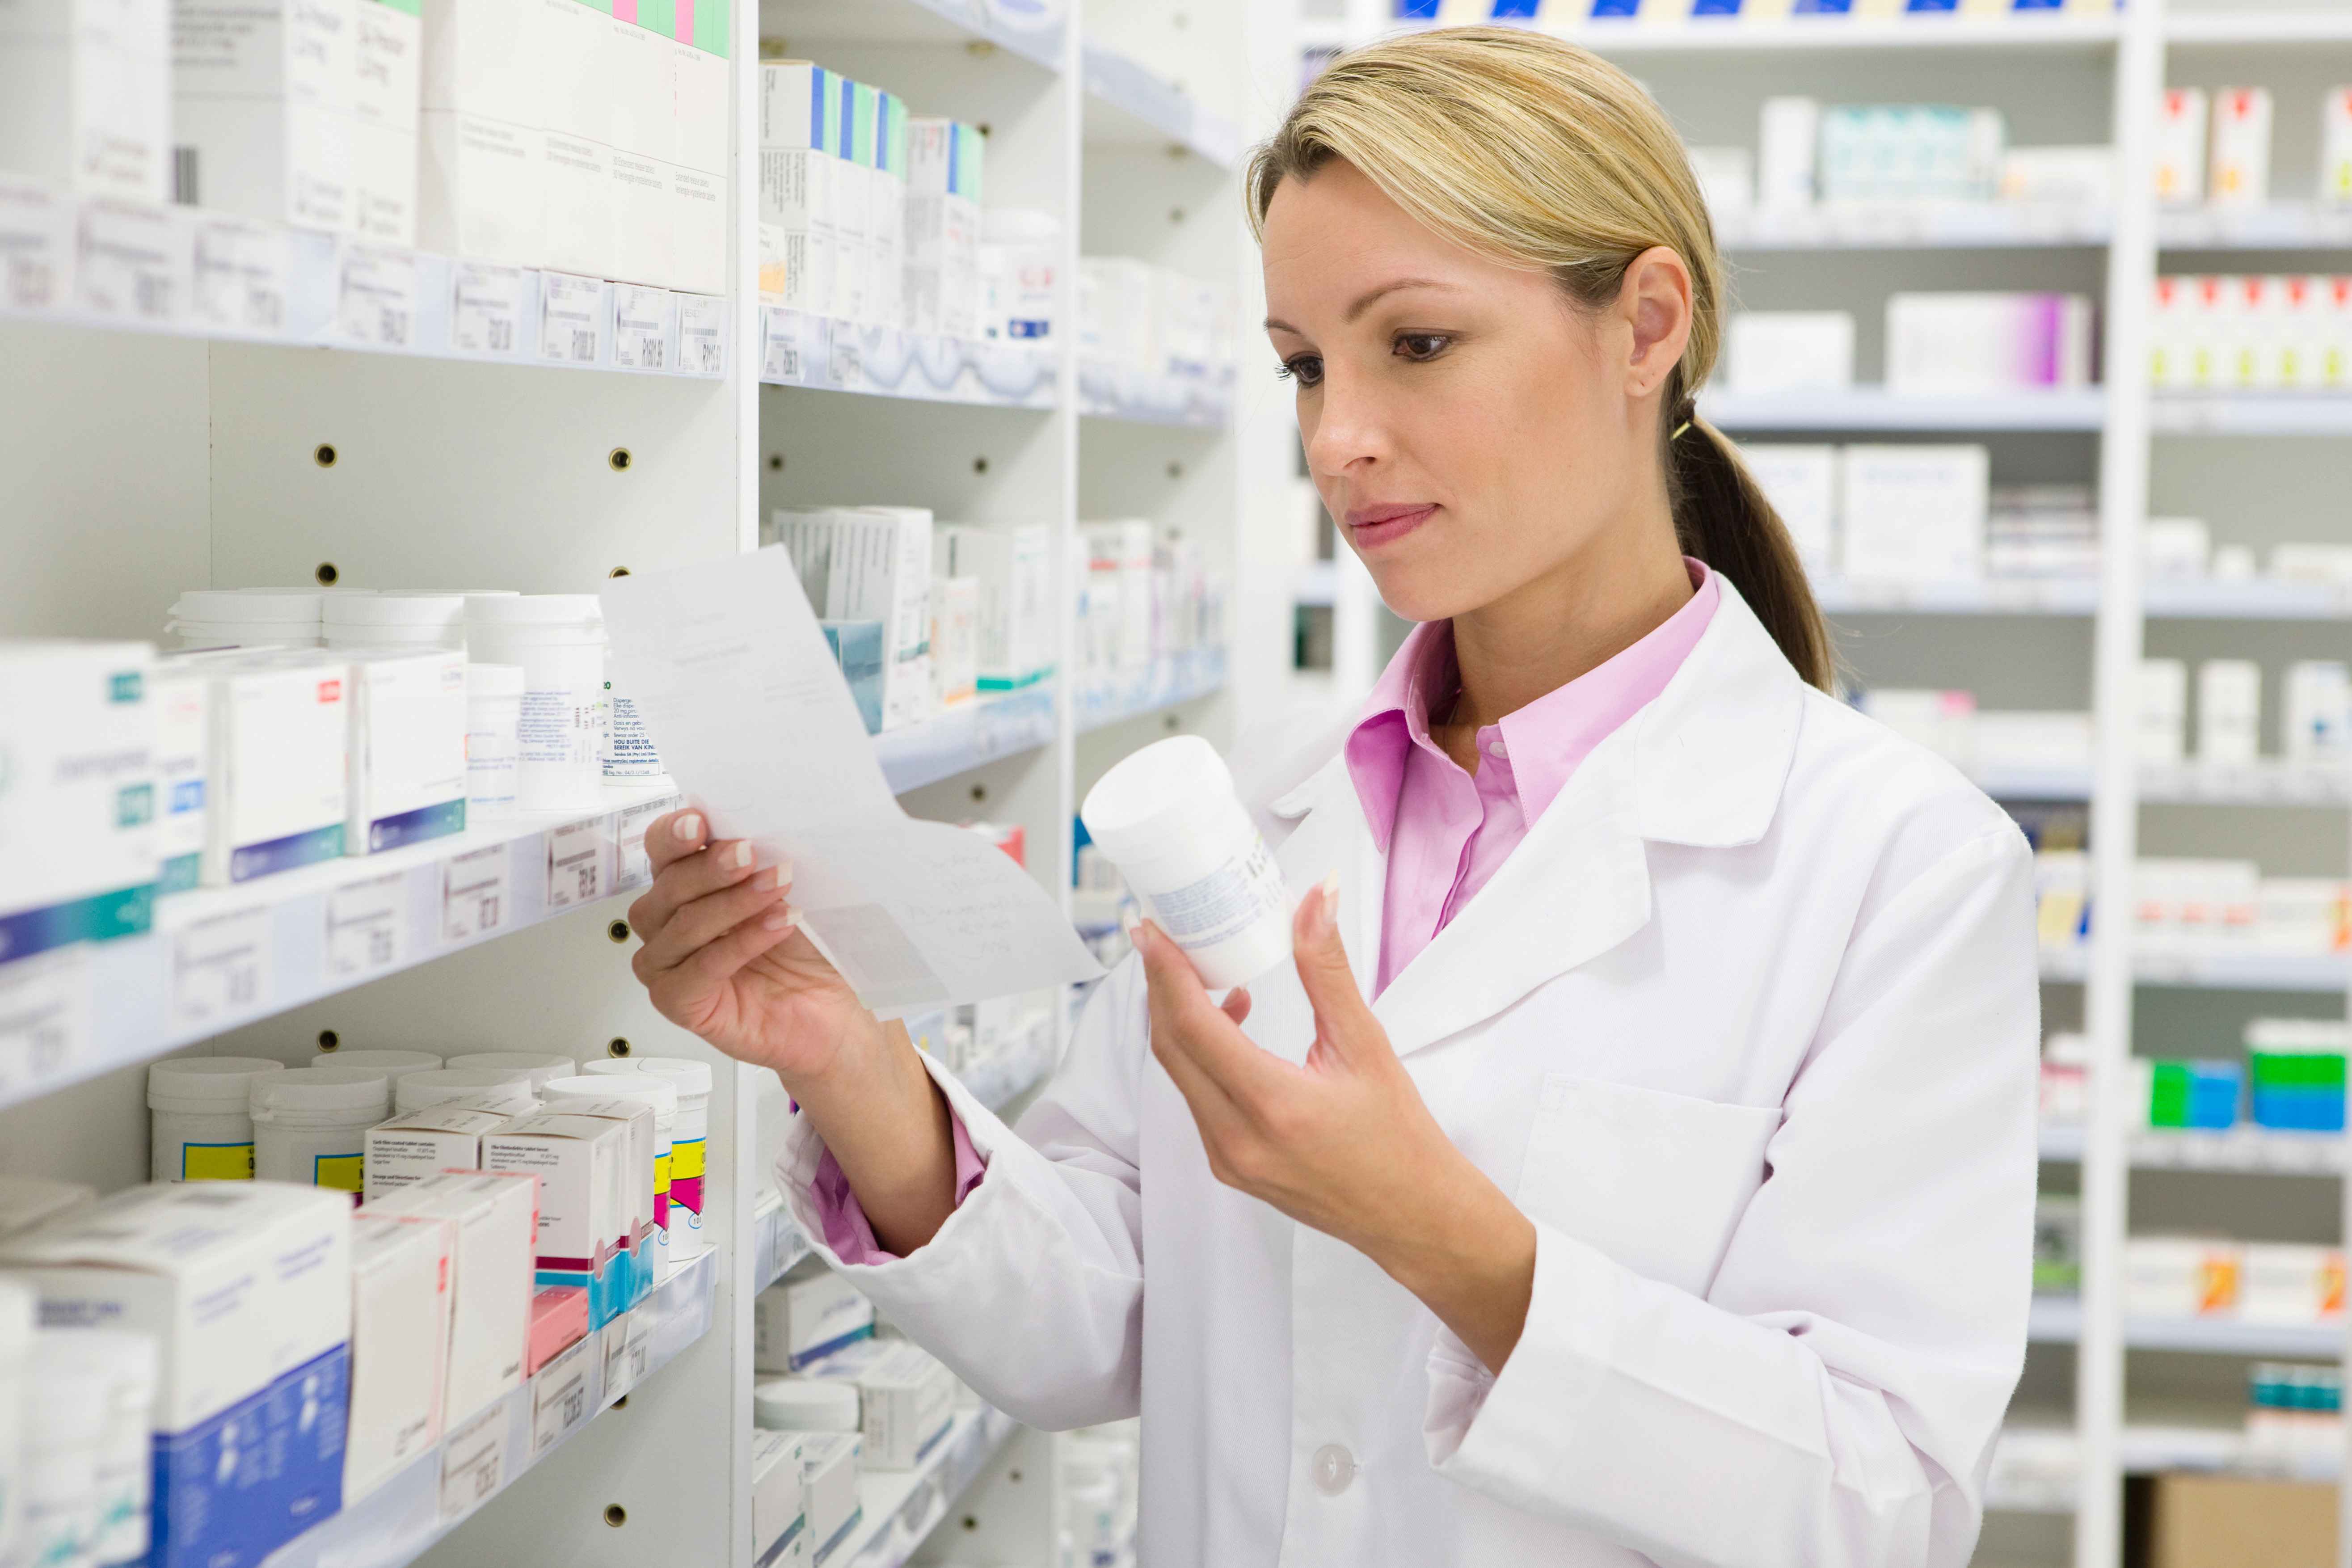 A woman doctor is holding a paper and white plastic bottle in her hands while standing in a pharmaceutical store.